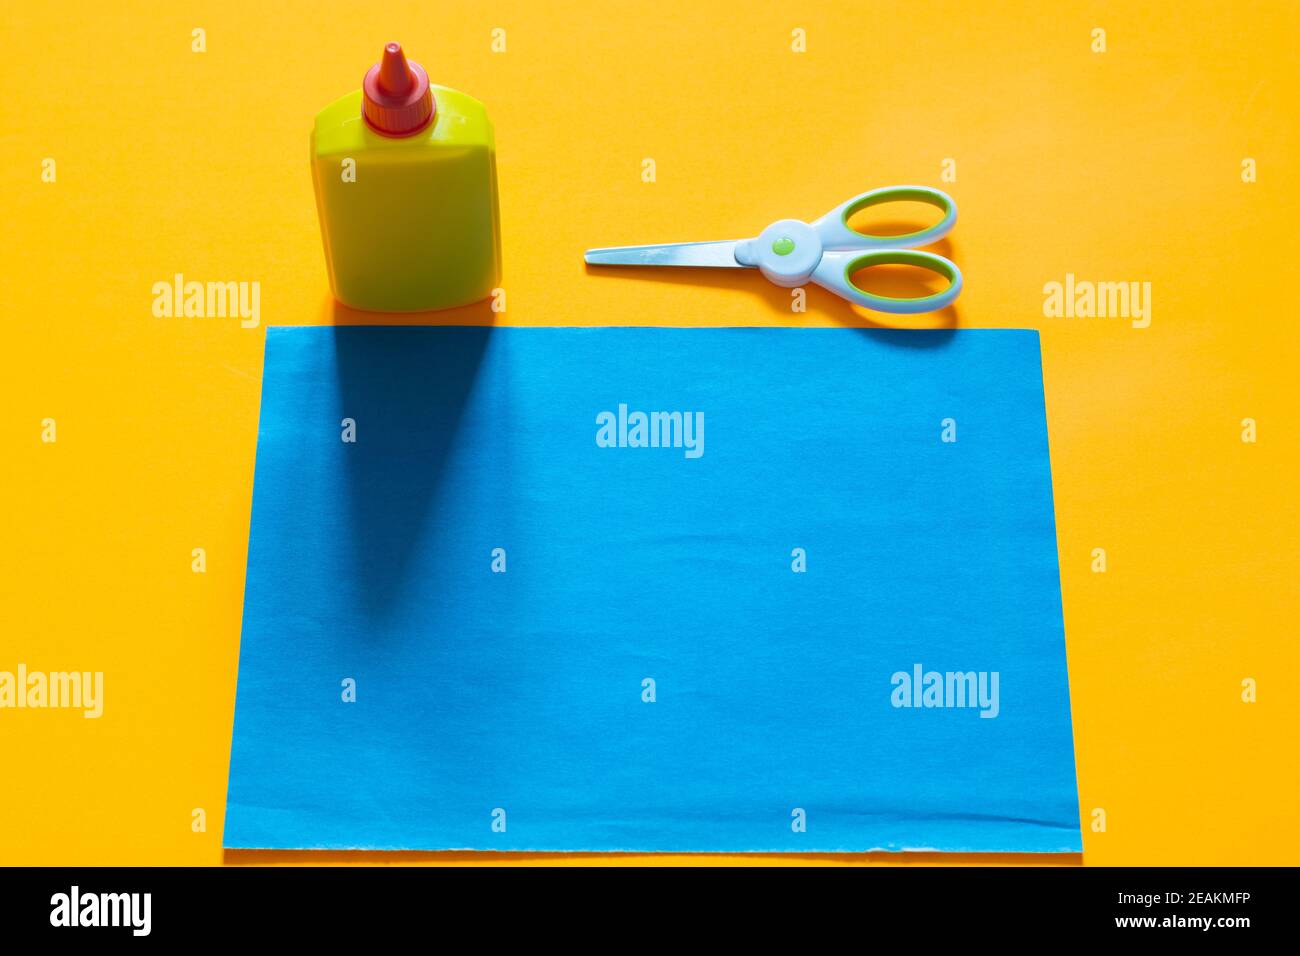 On a yellow background lies a sheet of blue colored paper, next to it there is a tube of glue and scissors Stock Photo